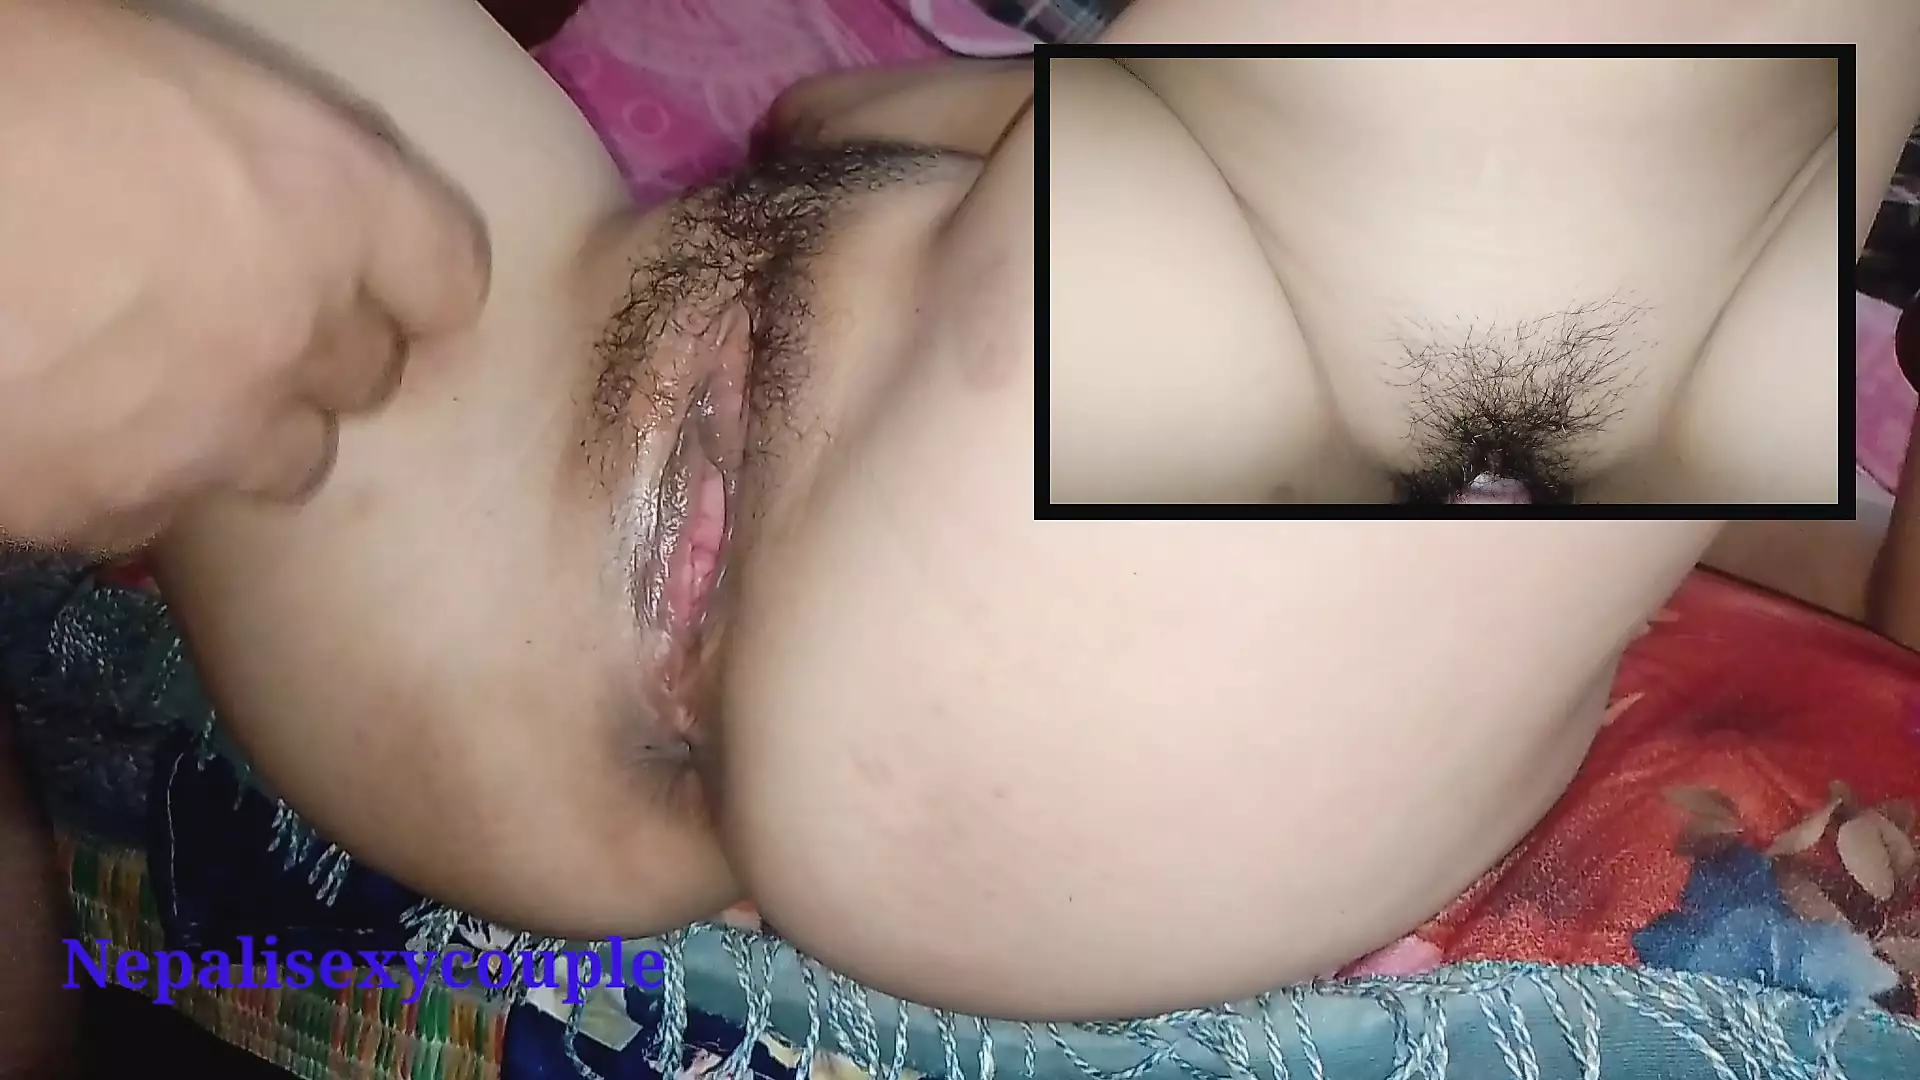 Nepali Sexy Couple In Hard Homemade Sex Video picture